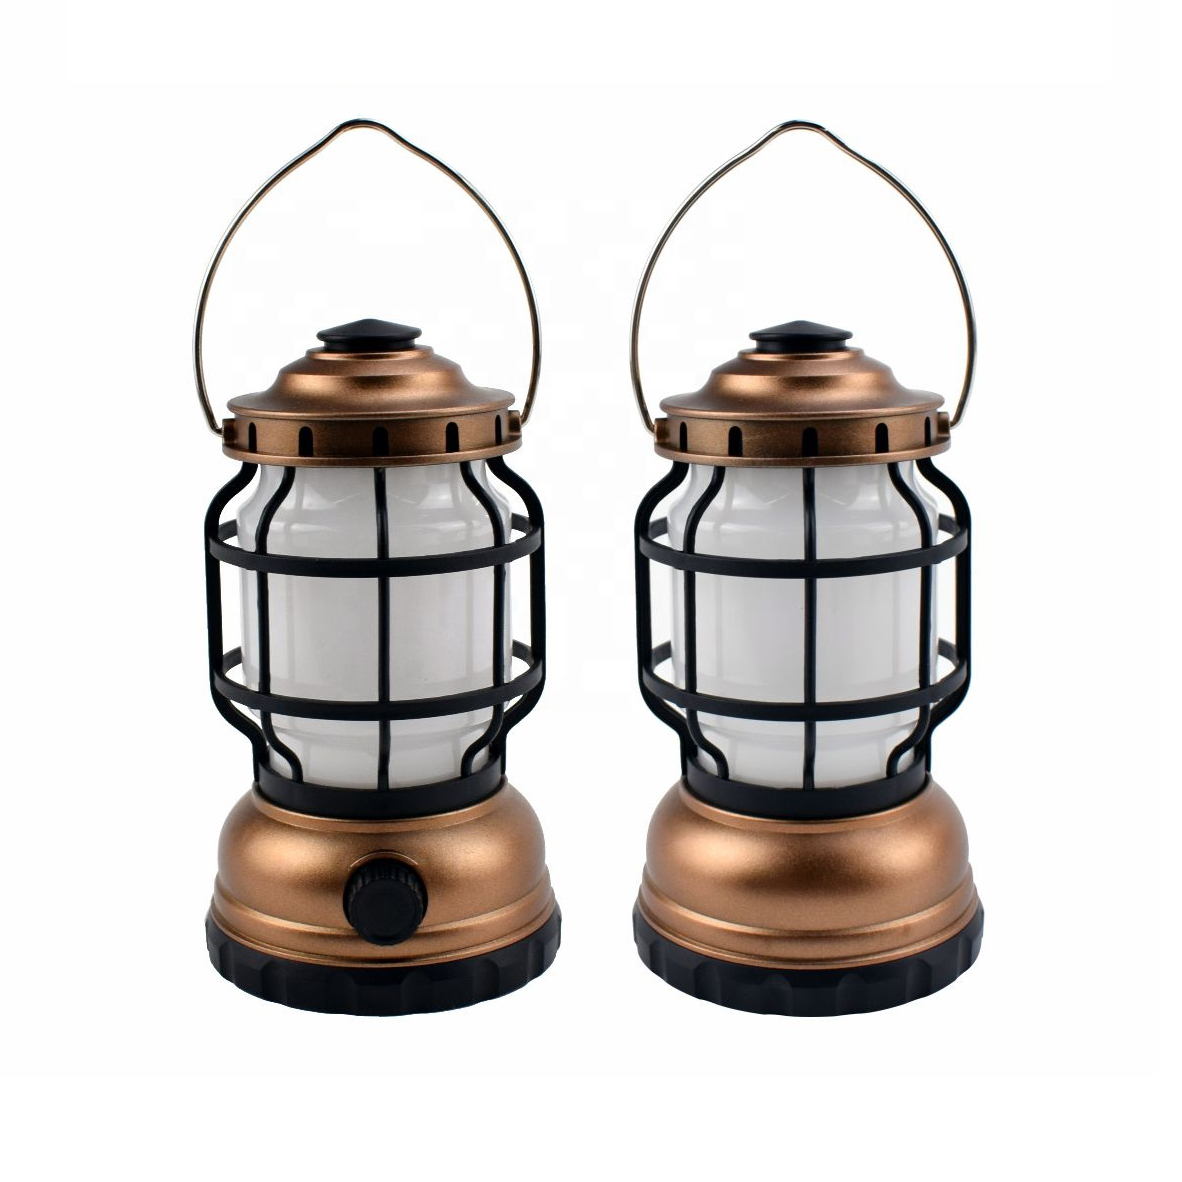 Retro Kerosene Waterproof Outdoor LED Collapsible Camping Lantern Rechargeable Camping Light for Emergency USB Body LED